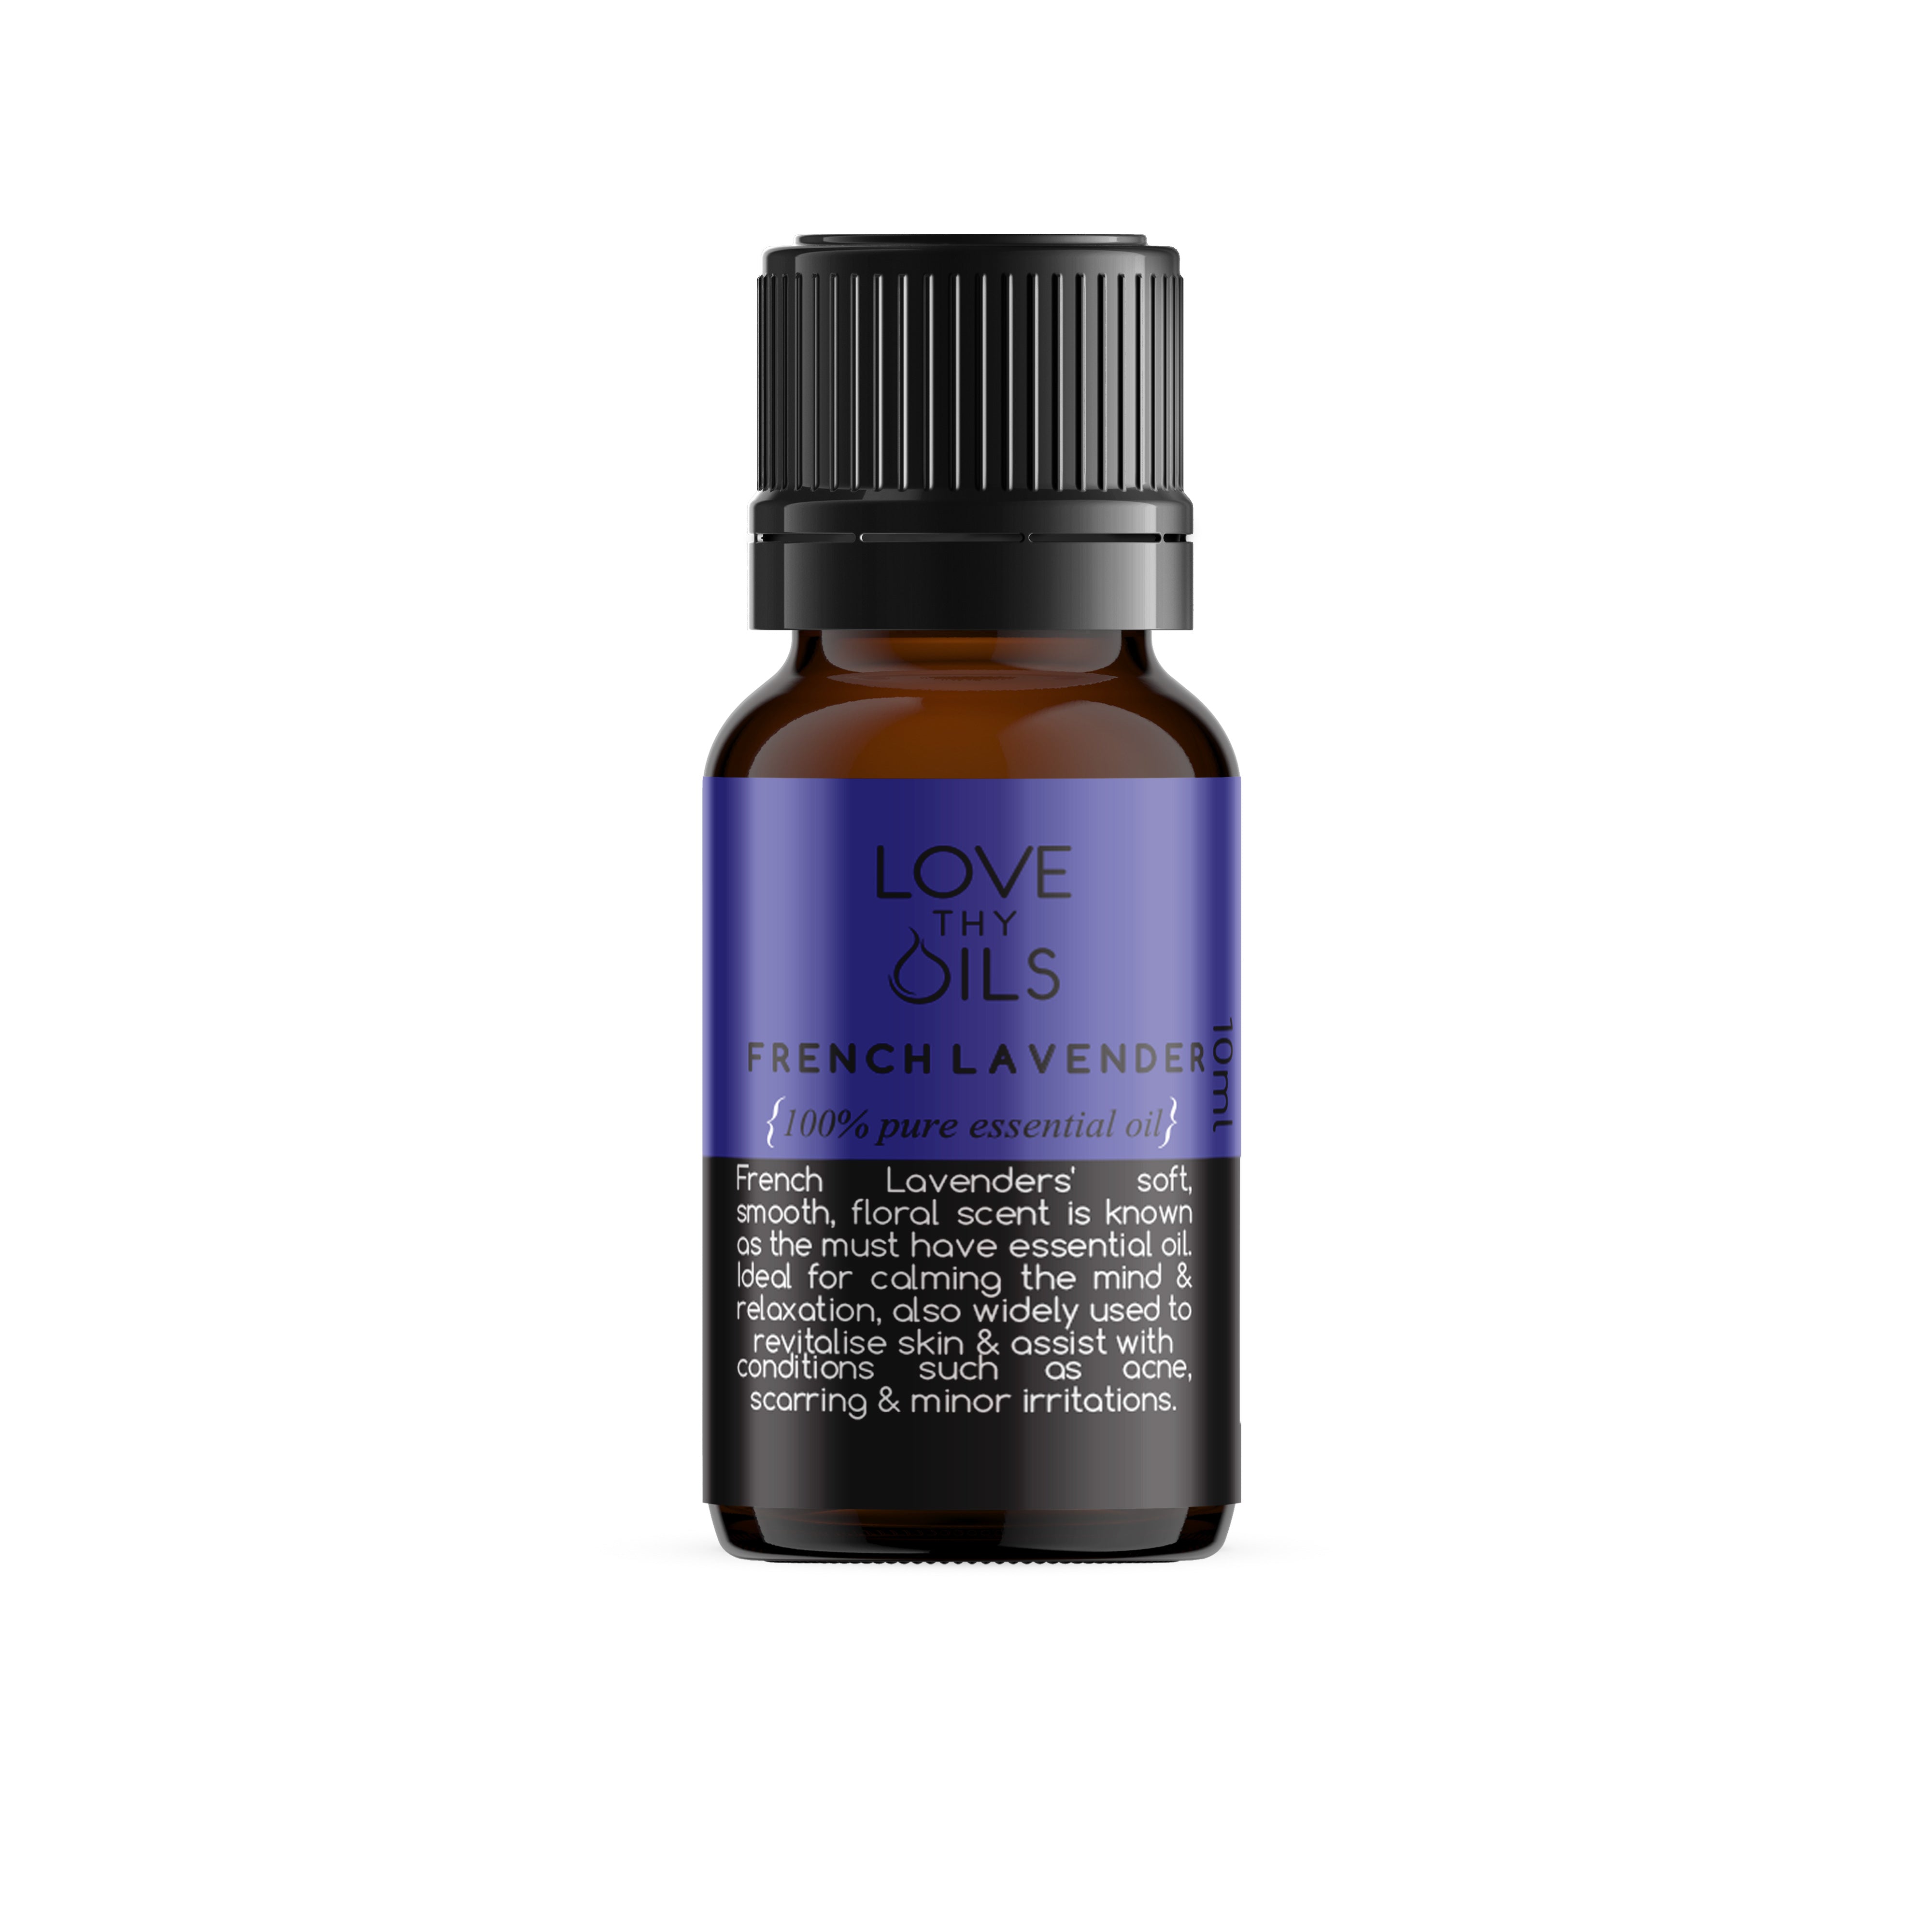 100% Pure Essential Oil French Lavender. Essential oil for calming and sleep.